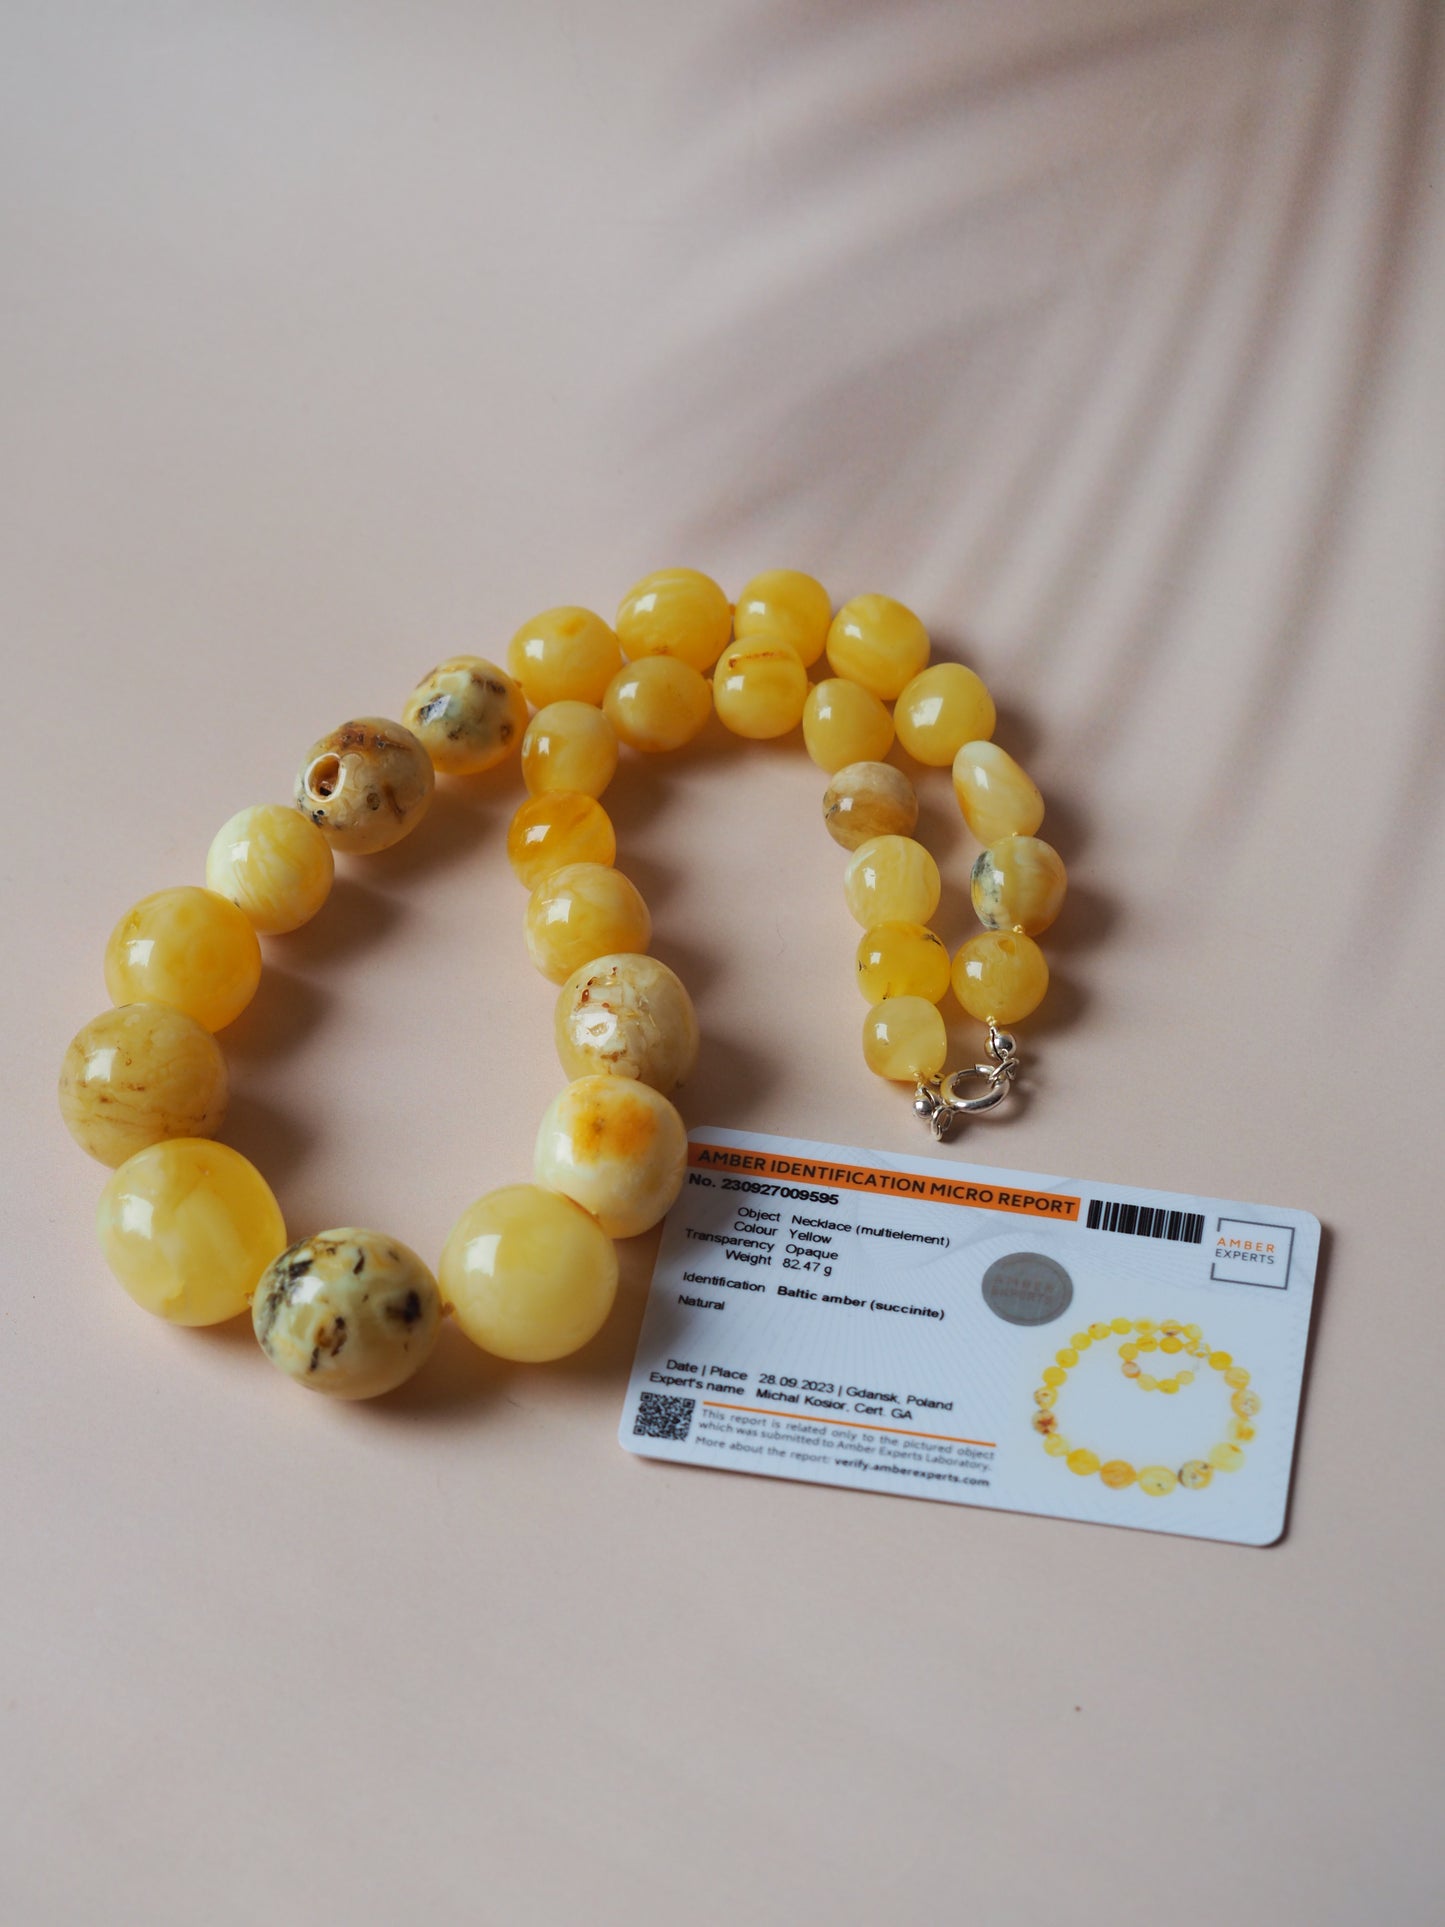 Big Unique Amber Necklace with Certificate